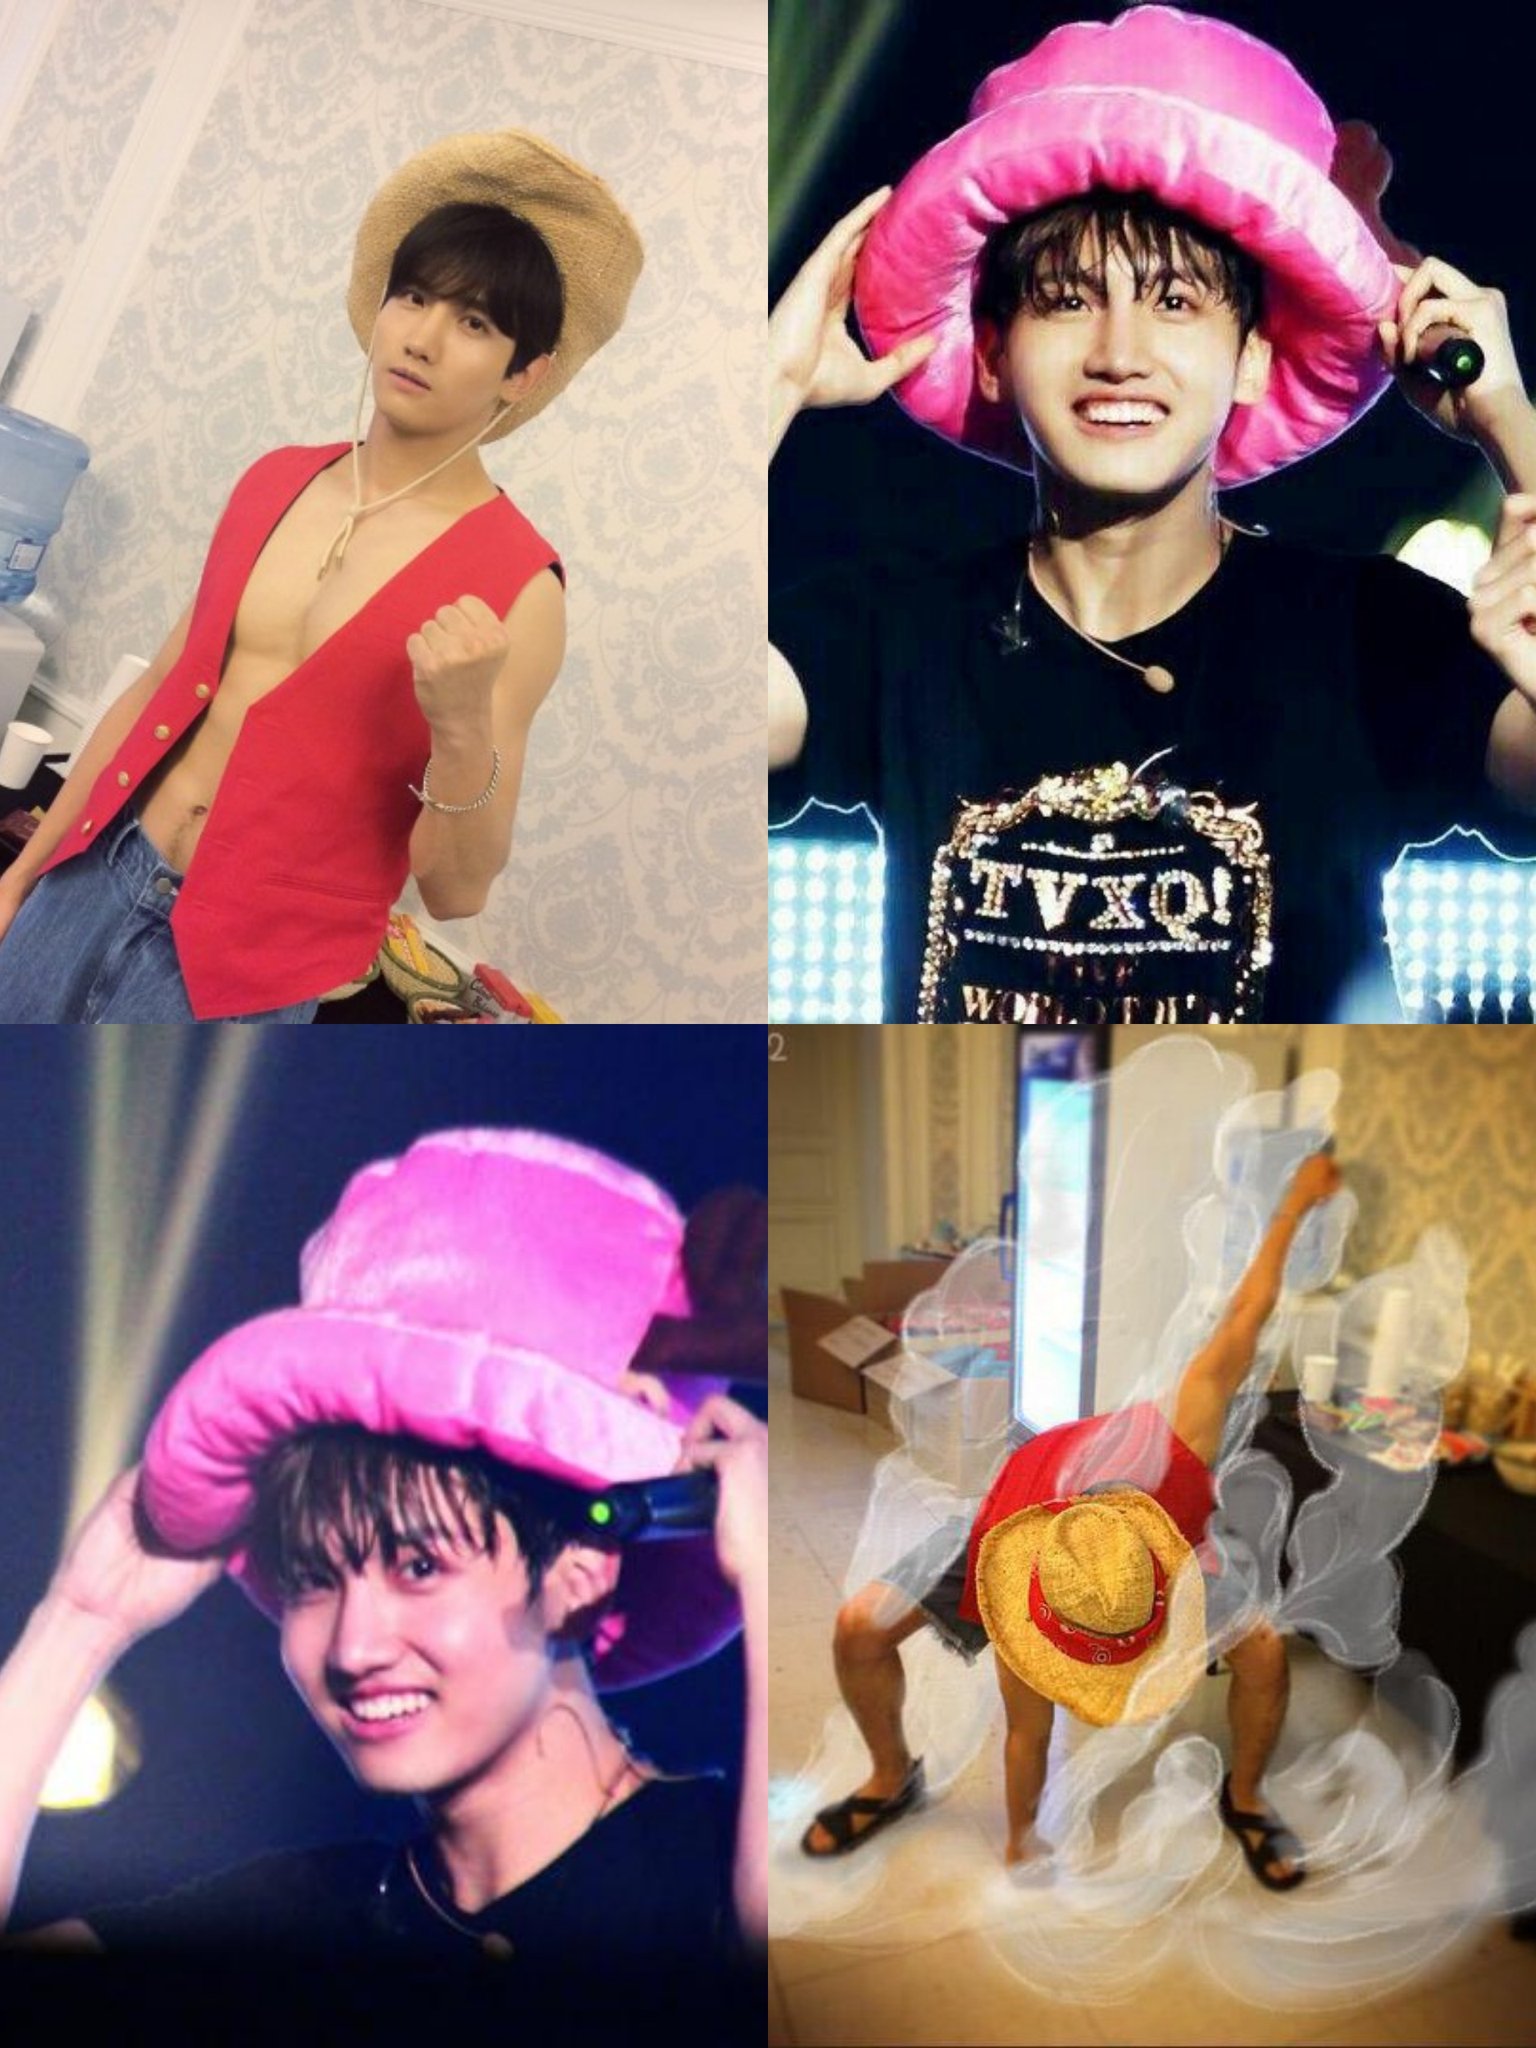 Changmin Epitaph 在twitter 上 Tohoshinki One Piece Official Goods Changmin As Portgas D Ace Yunho As Zoro Just A Compilation Of Changmin Showing His Loves For One Piece 東方神起 Jeaious